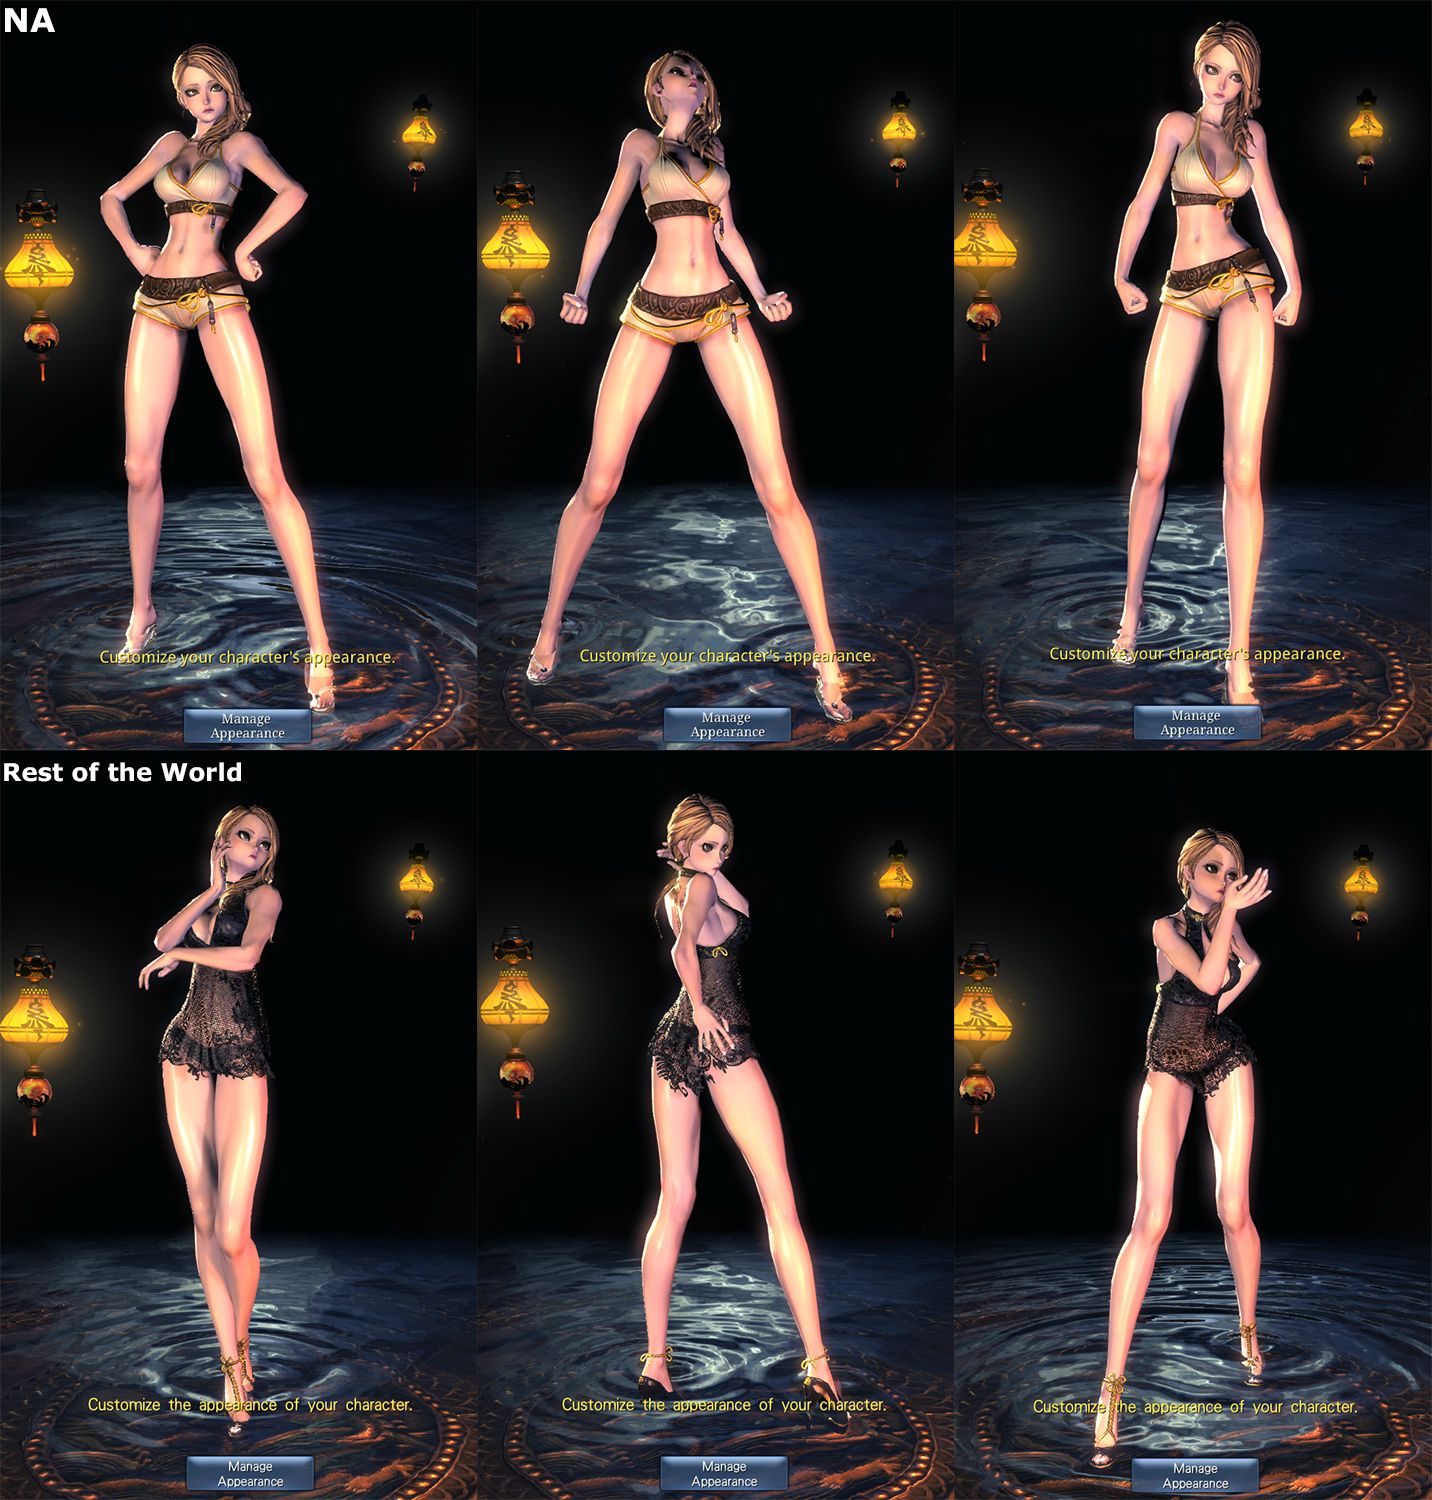 carol to recommends nude blade and soul pic